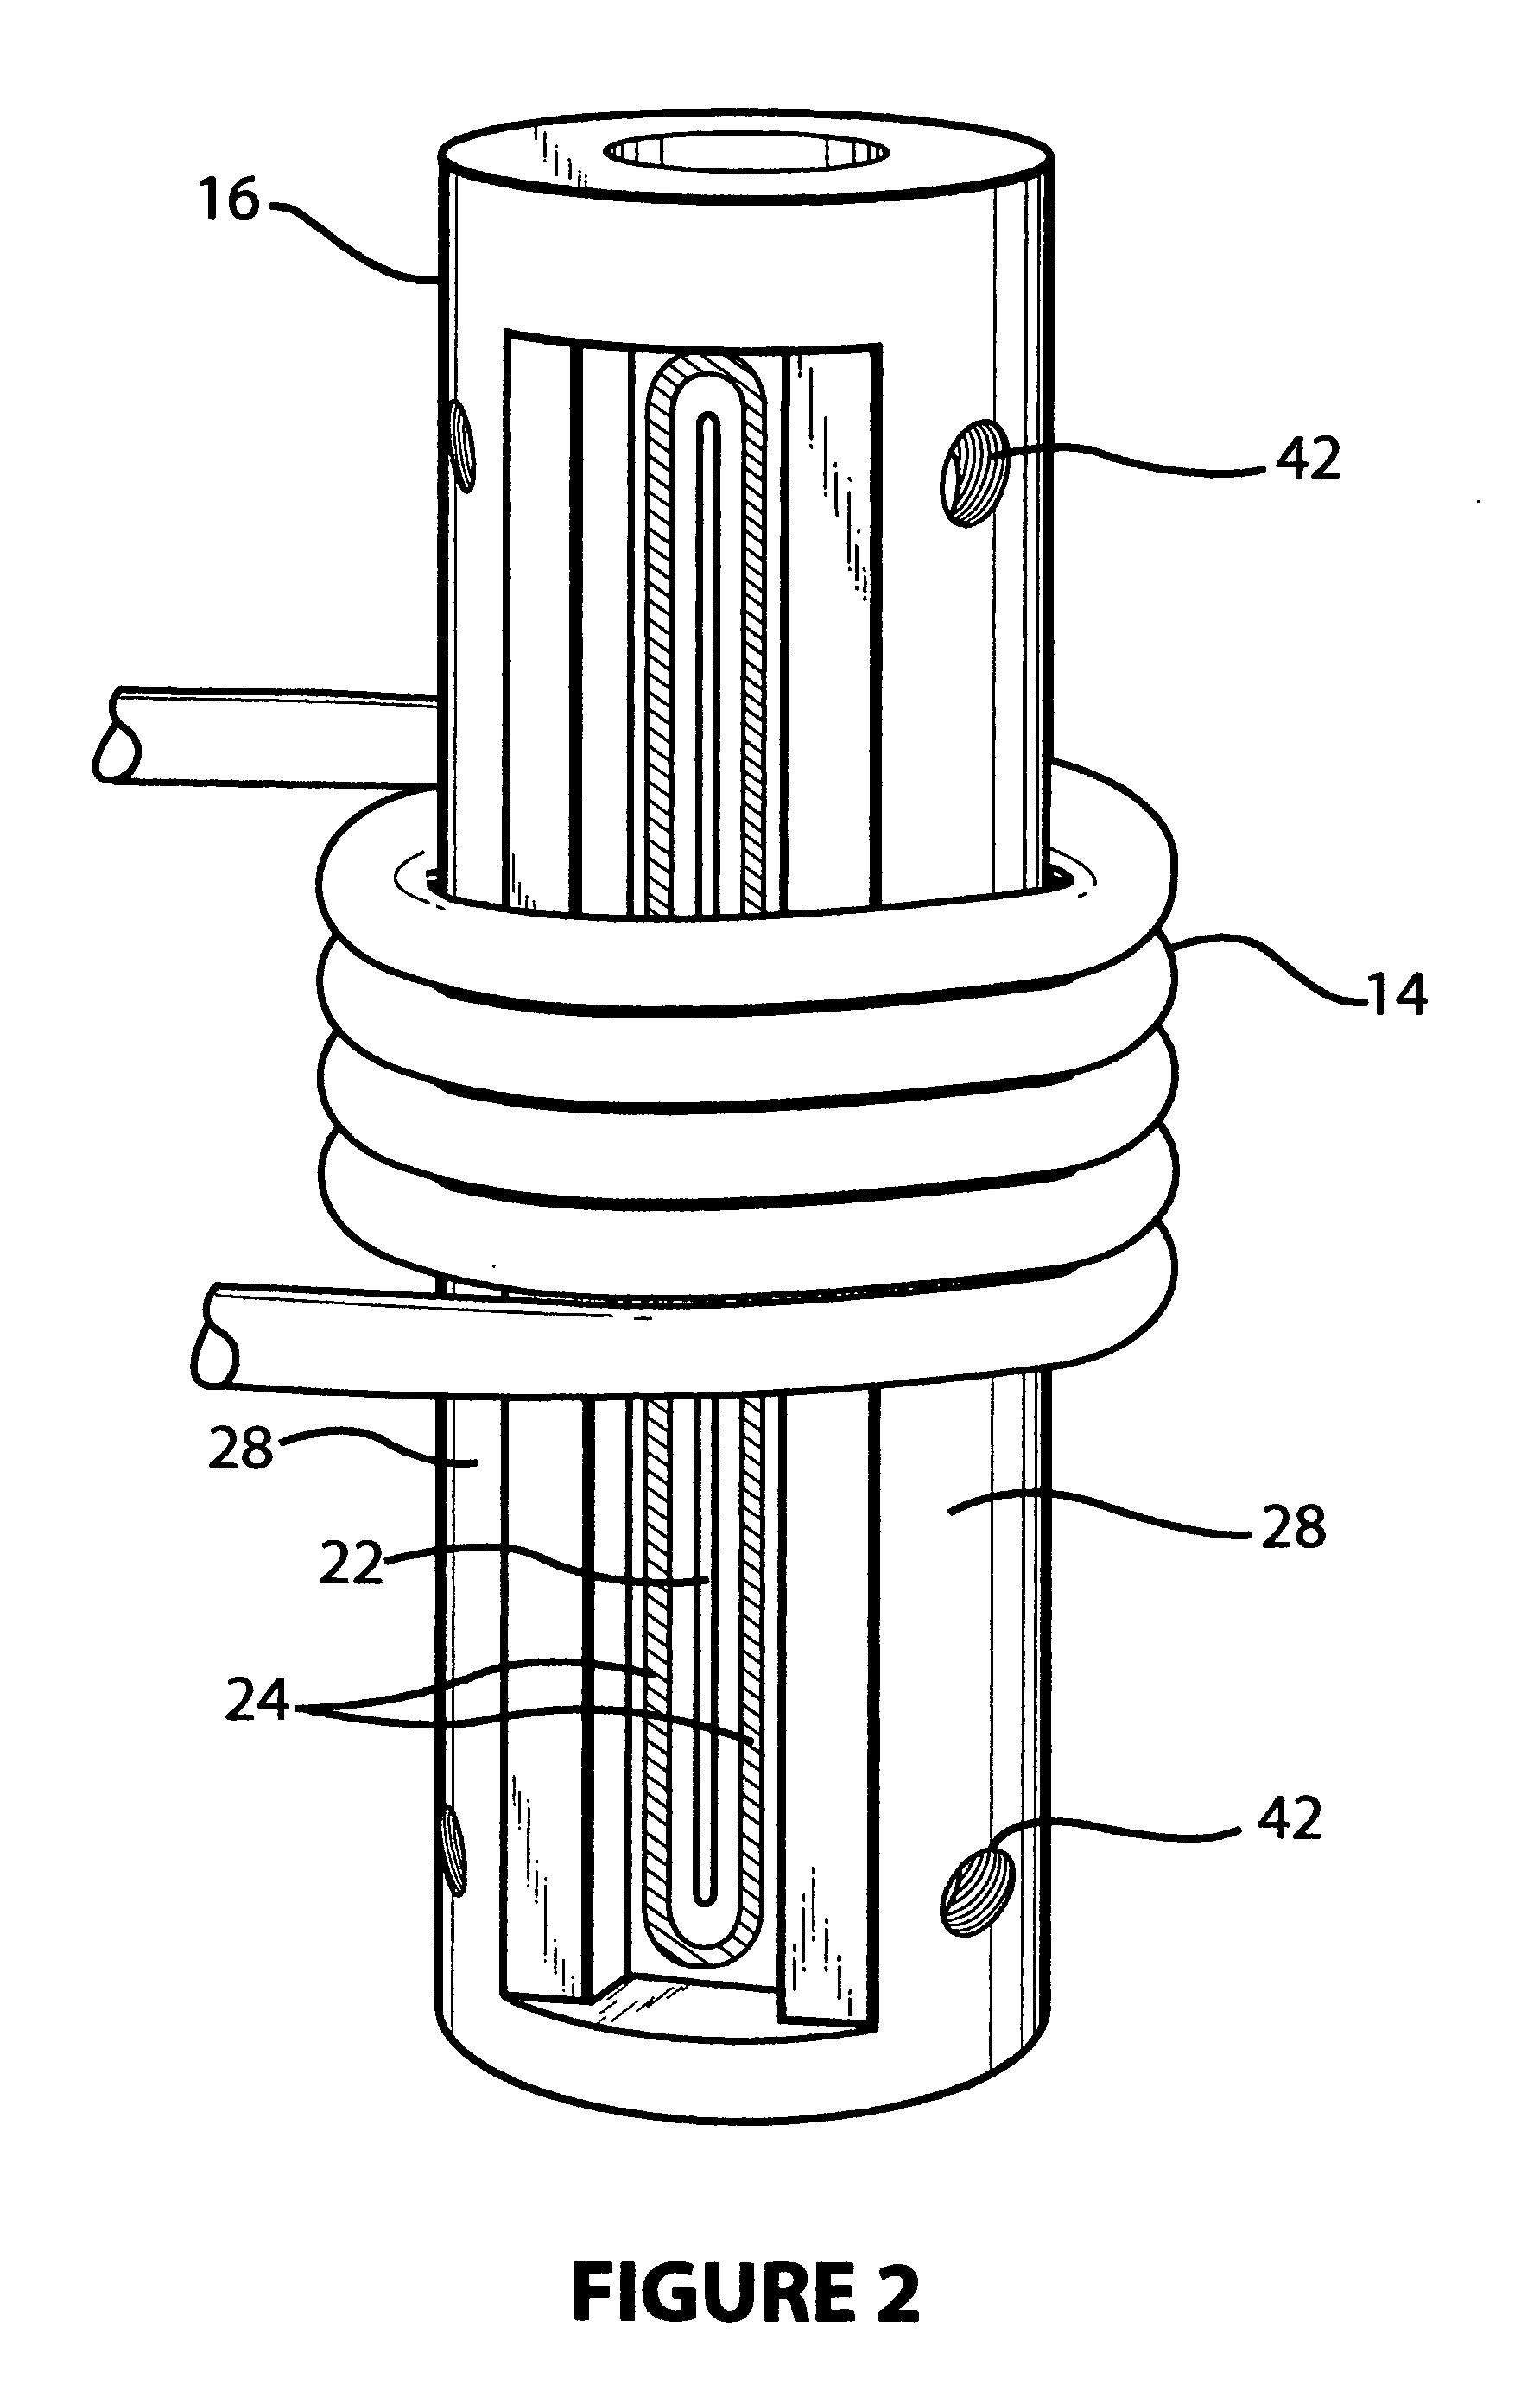 Inductively coupled plasma source using induced eddy currents